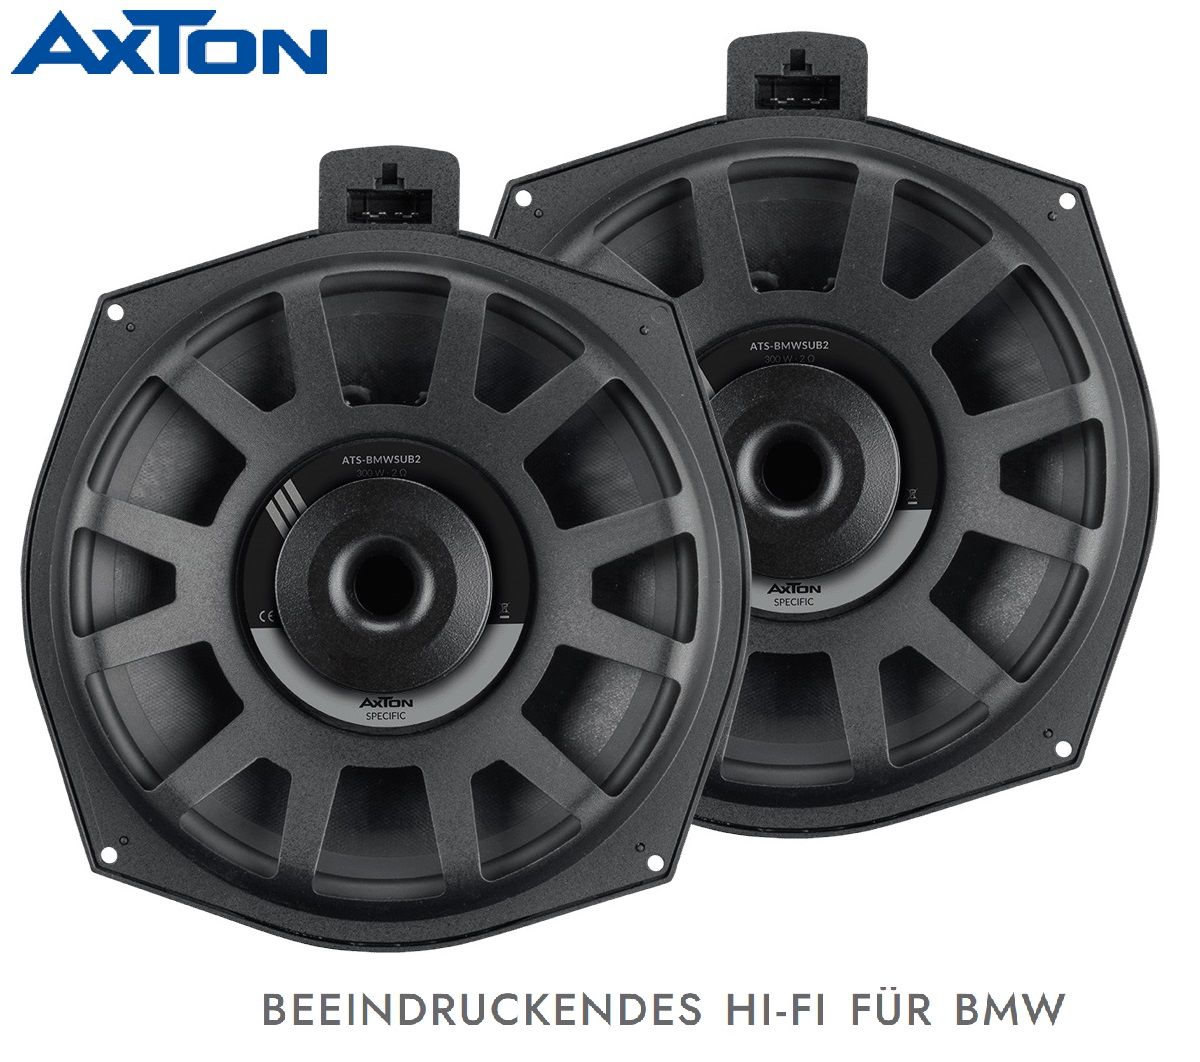 Axton Axton ATS-BSUB4 - 20cm subwoofer Under-seat Bass for BMW -MINI